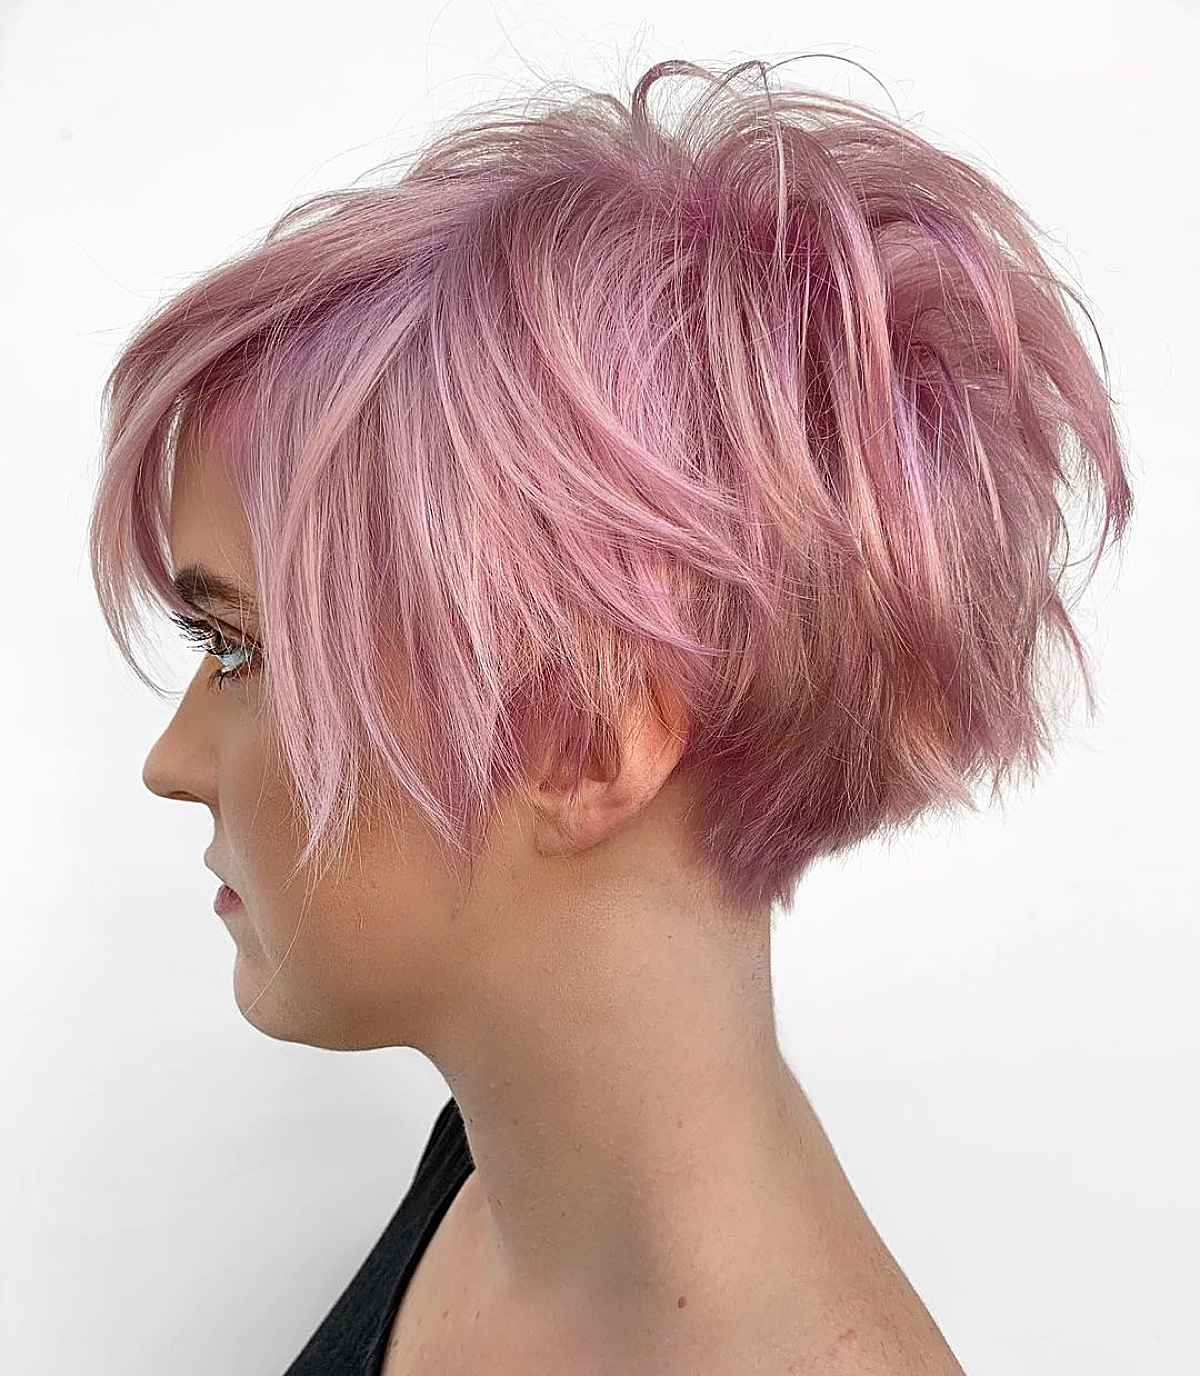 Textured Pixie Shag Cut with a Pastel Pink Color